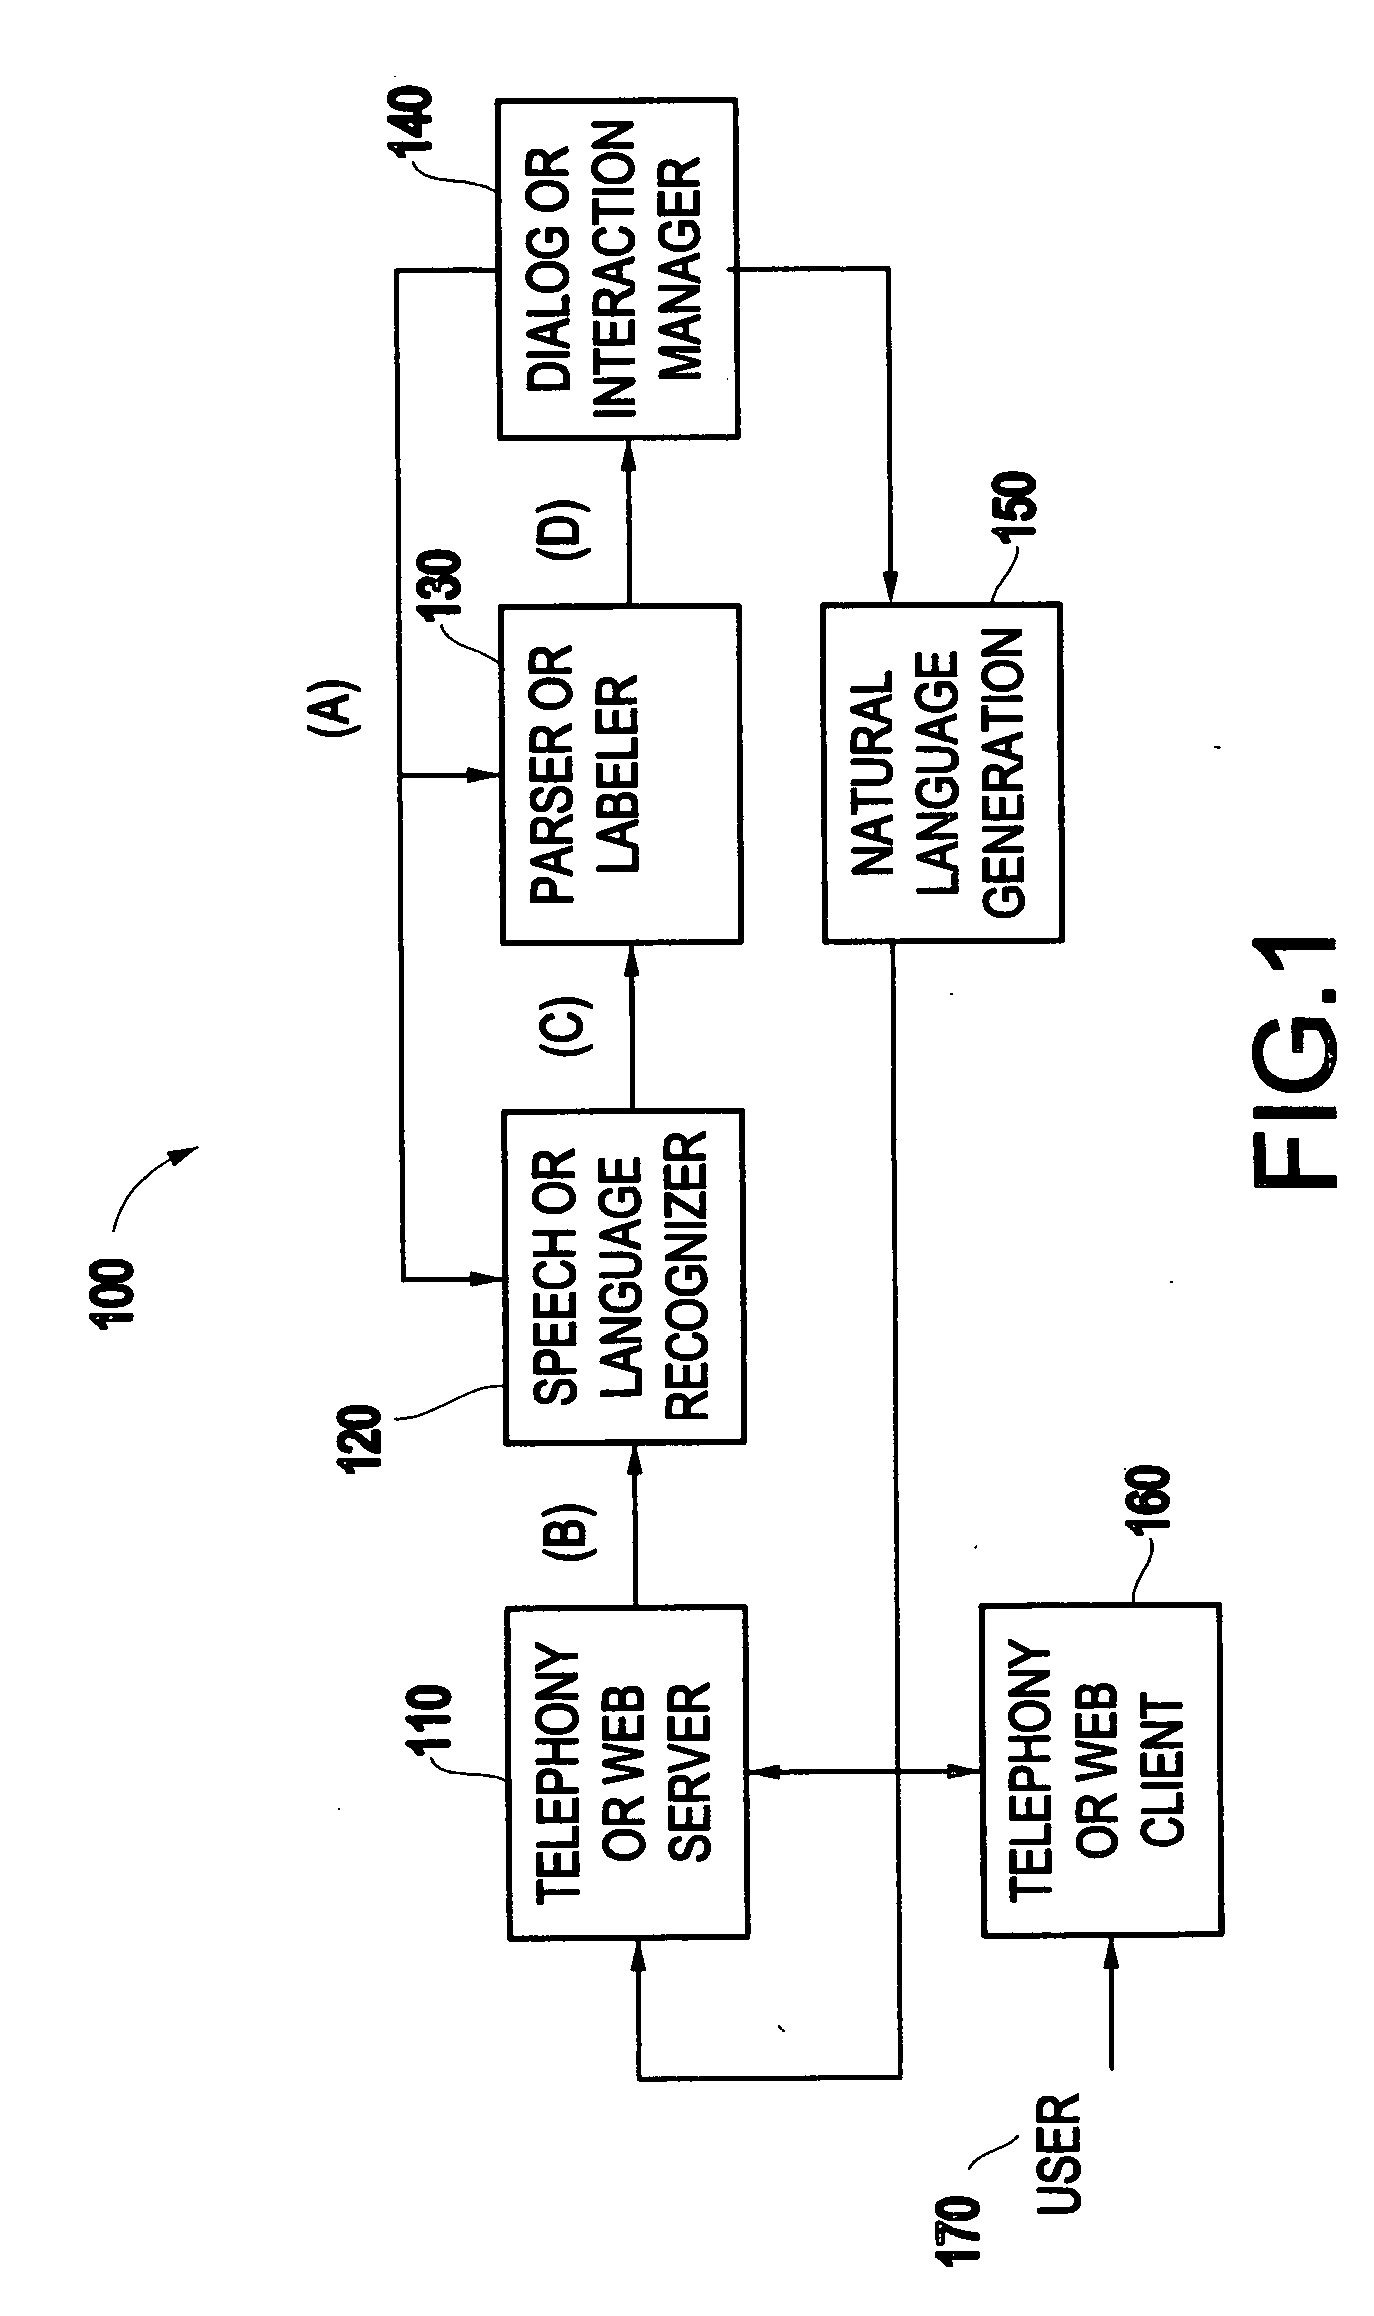 Method and system for efficient representation, manipulation, communication, and search of hierarchical composite named entities